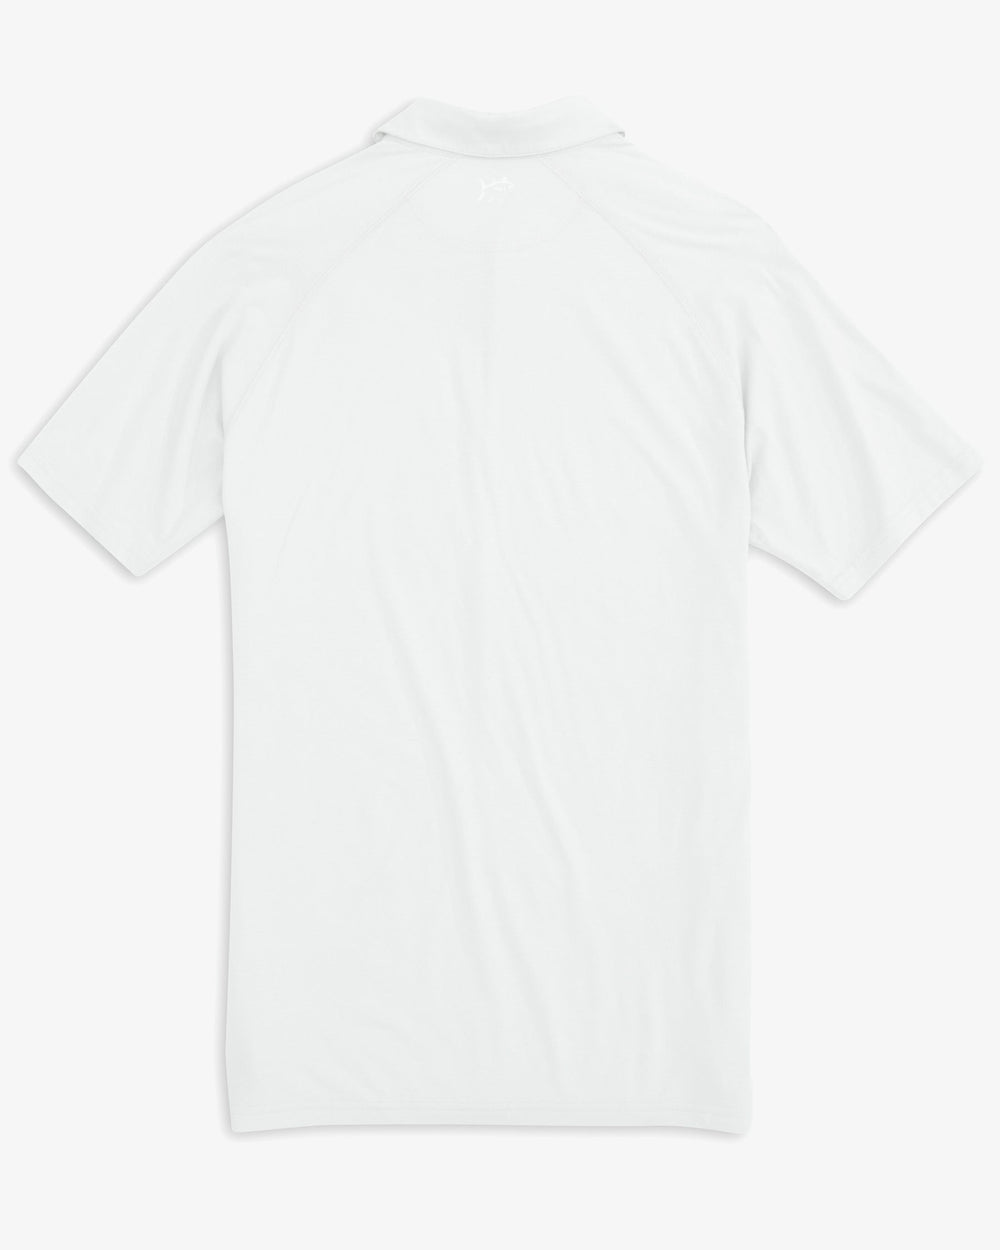 The back view of the Men's Racquet Performance Polo Shirt by Southern Tide - Classic White